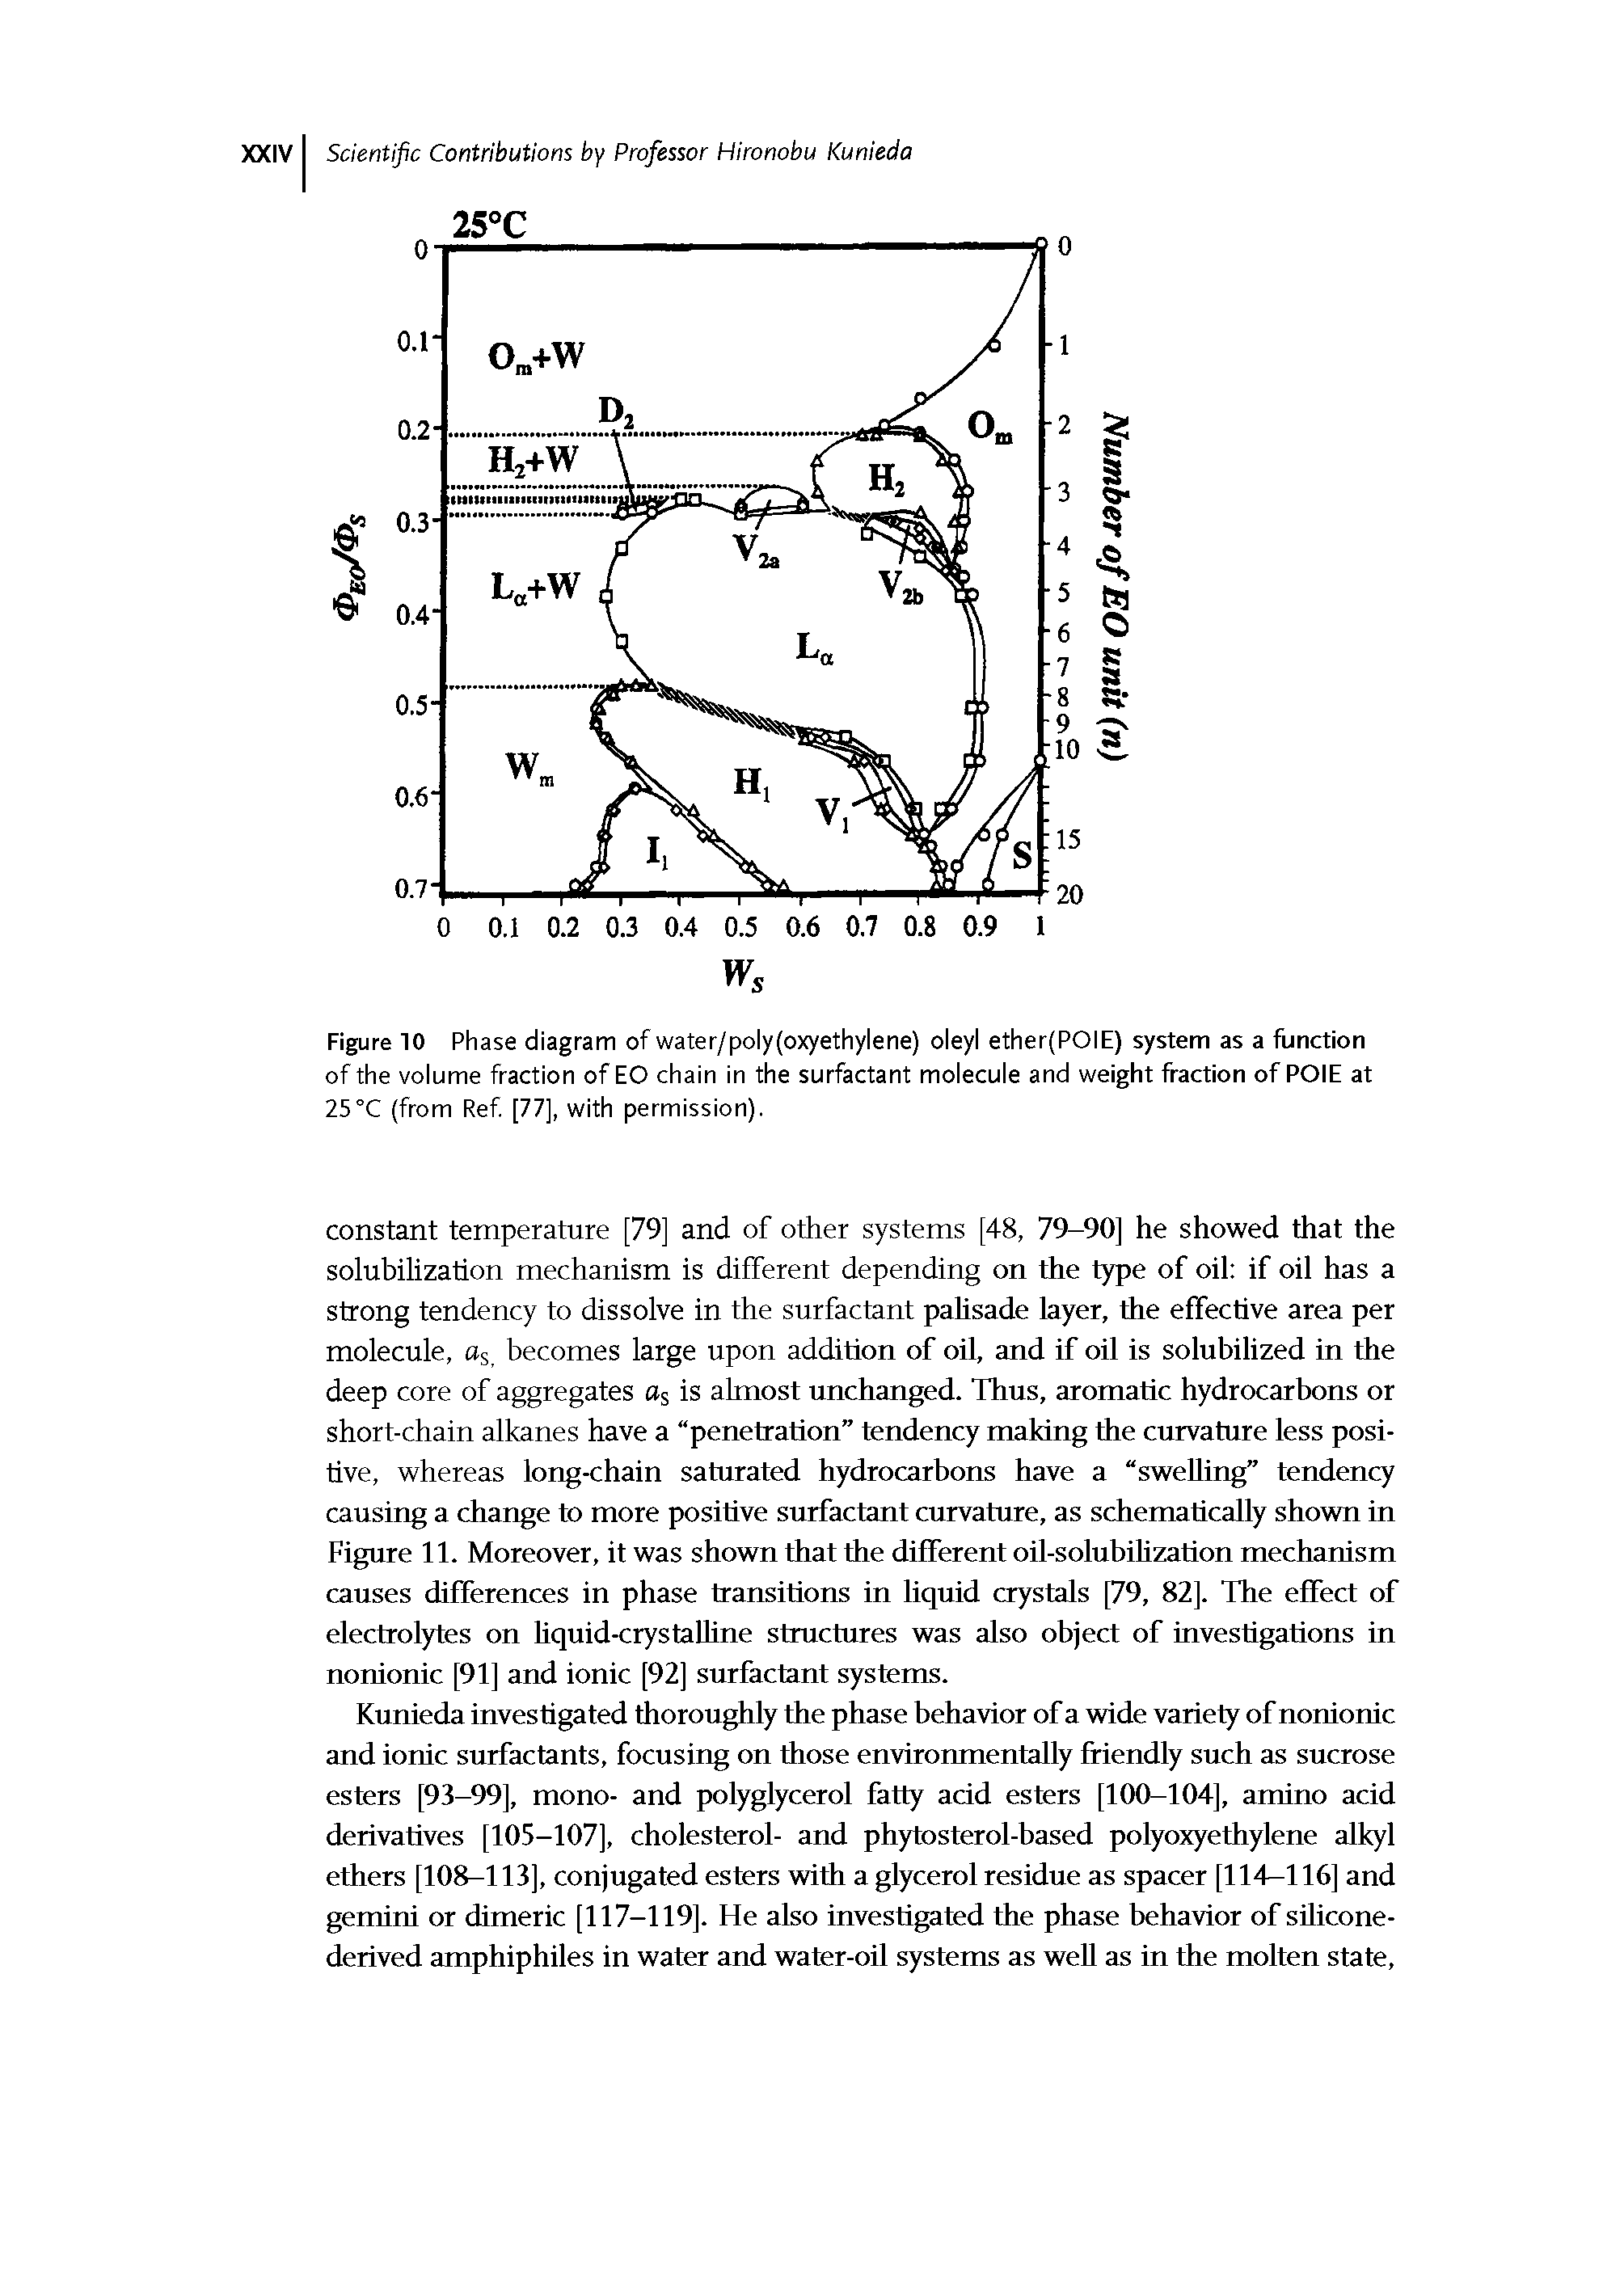 Figure 10 Phase diagram of water/poly(oxyethylene) oleyl ether(POIE) system as a function of the volume fraction of EO chain in the surfactant molecule and weight fraction of POIE at 25°C (from Ref [77], with permission).